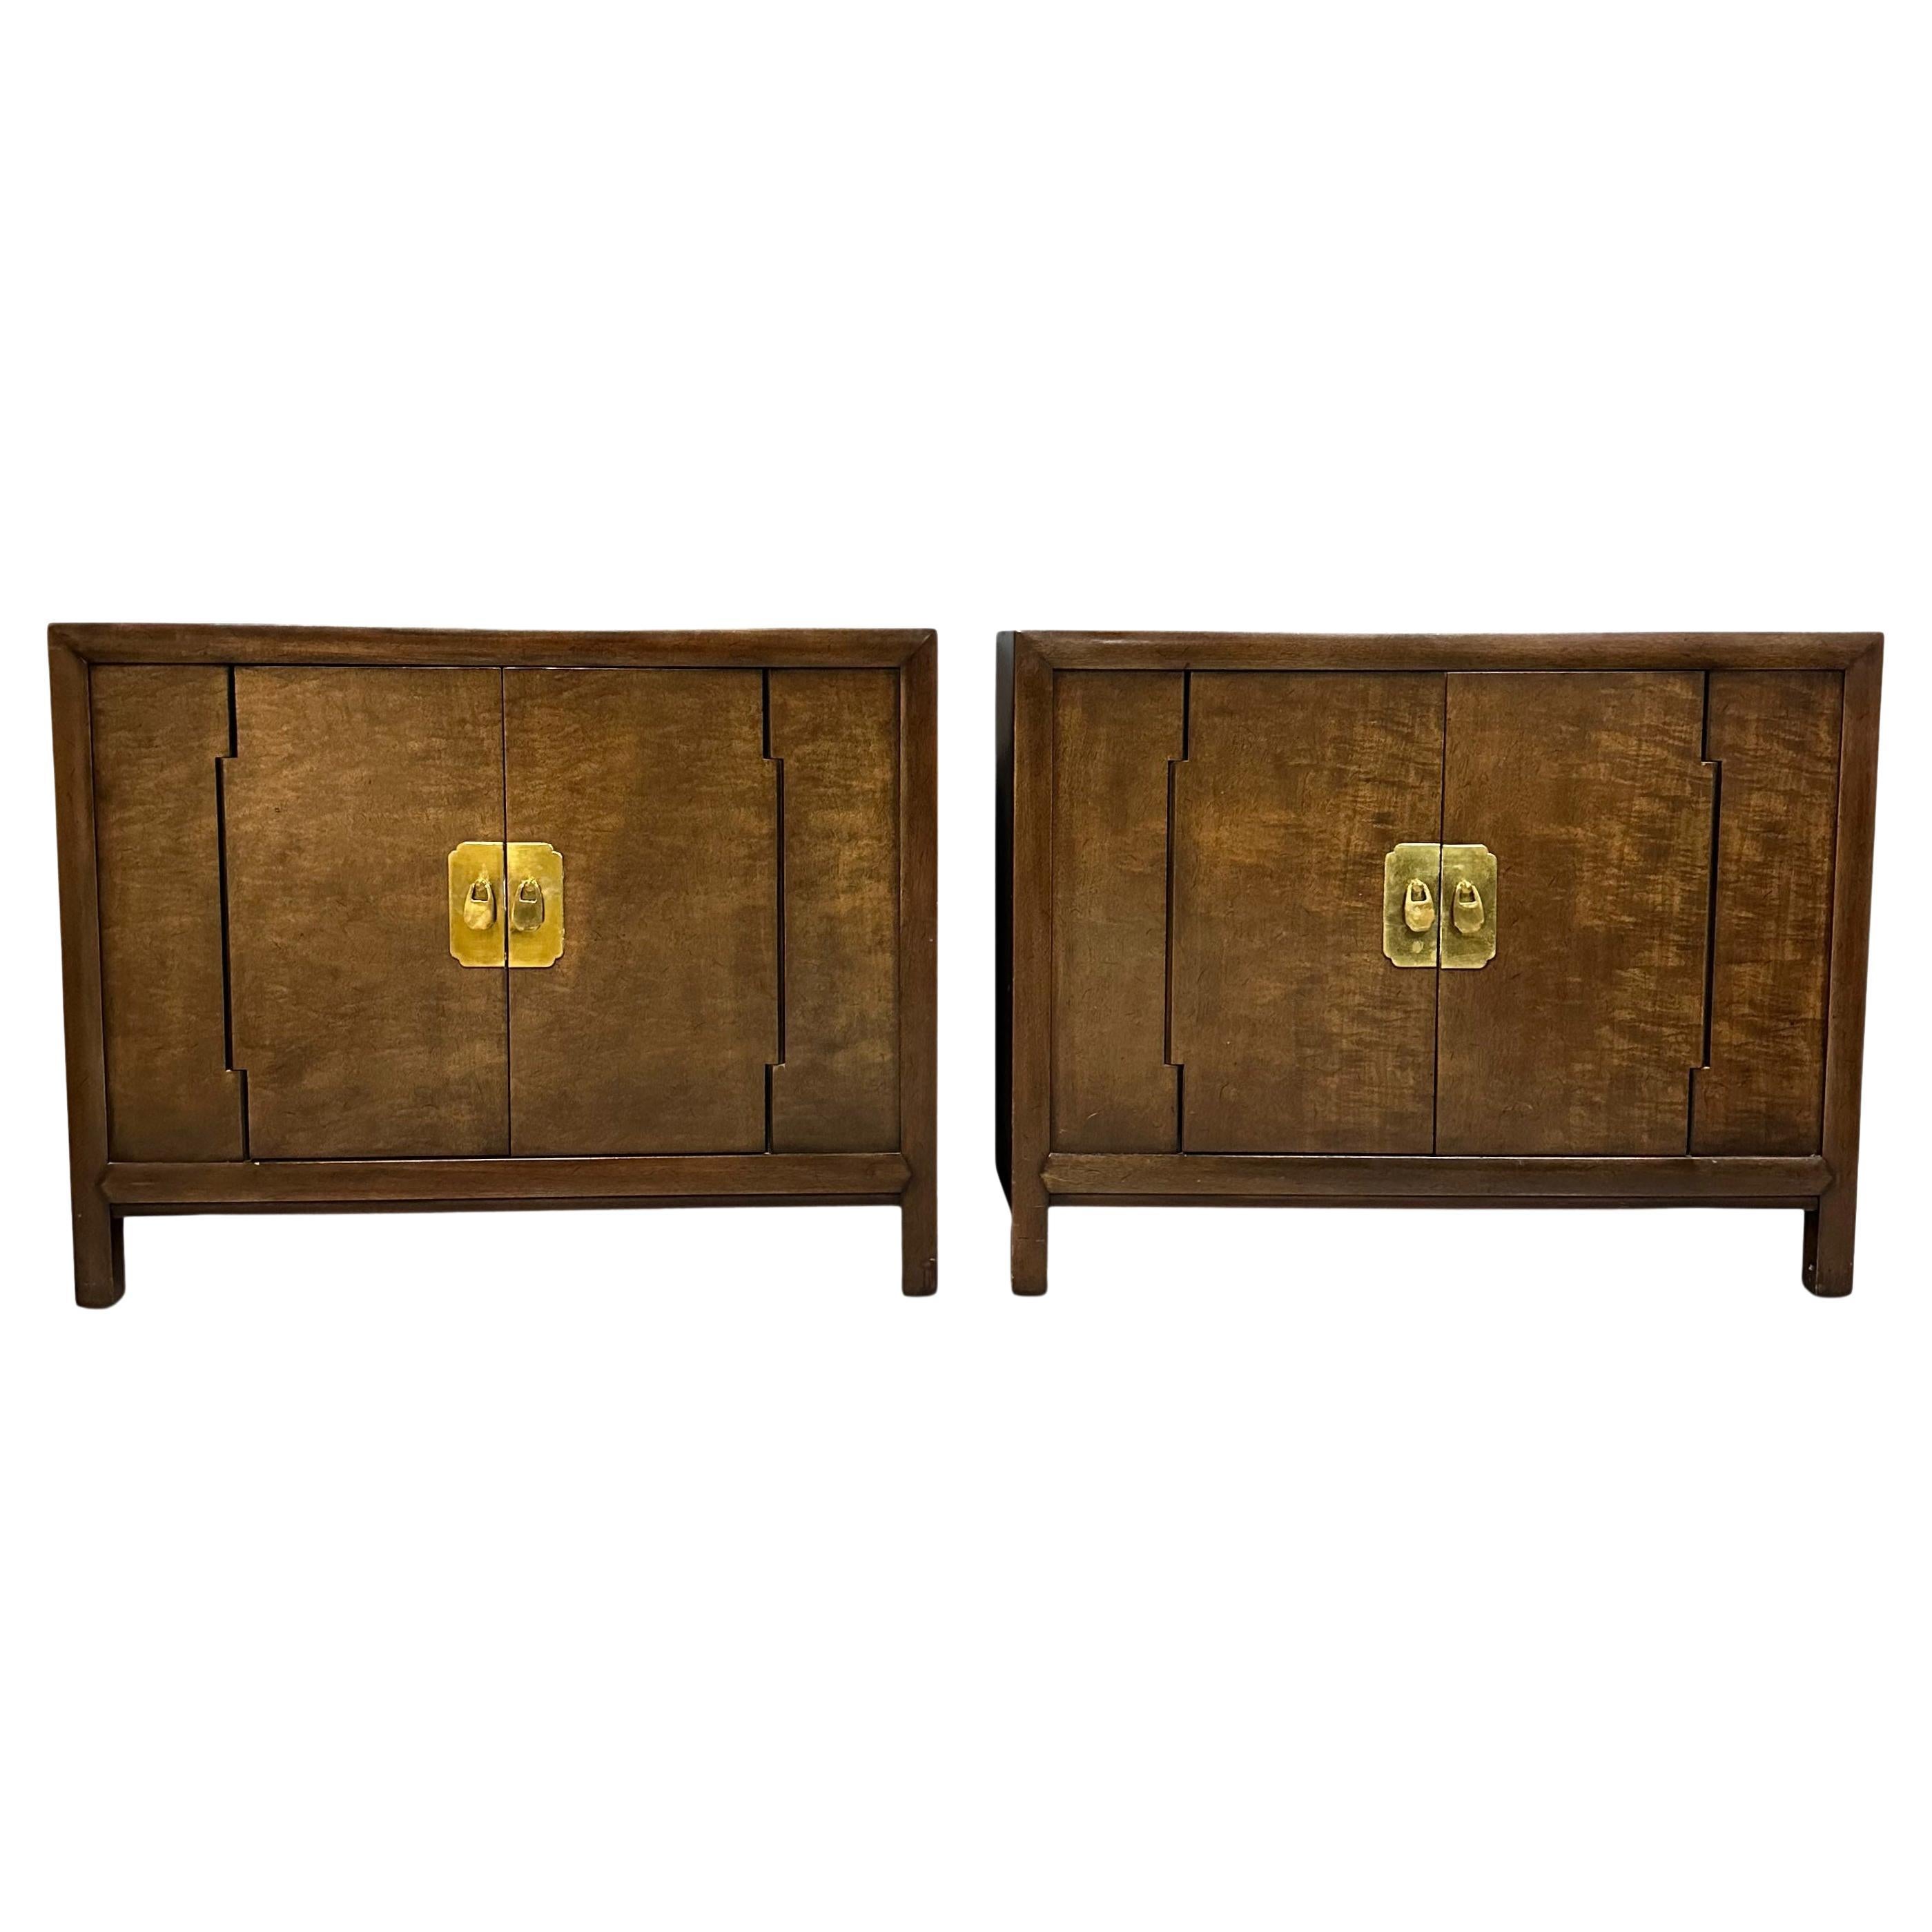 Wonderful pair of two door chests in fruitwood with brass accents. The doors have an unusual hinge configuration that open to reveal a single shelf. These chests can be utilized in many applications.